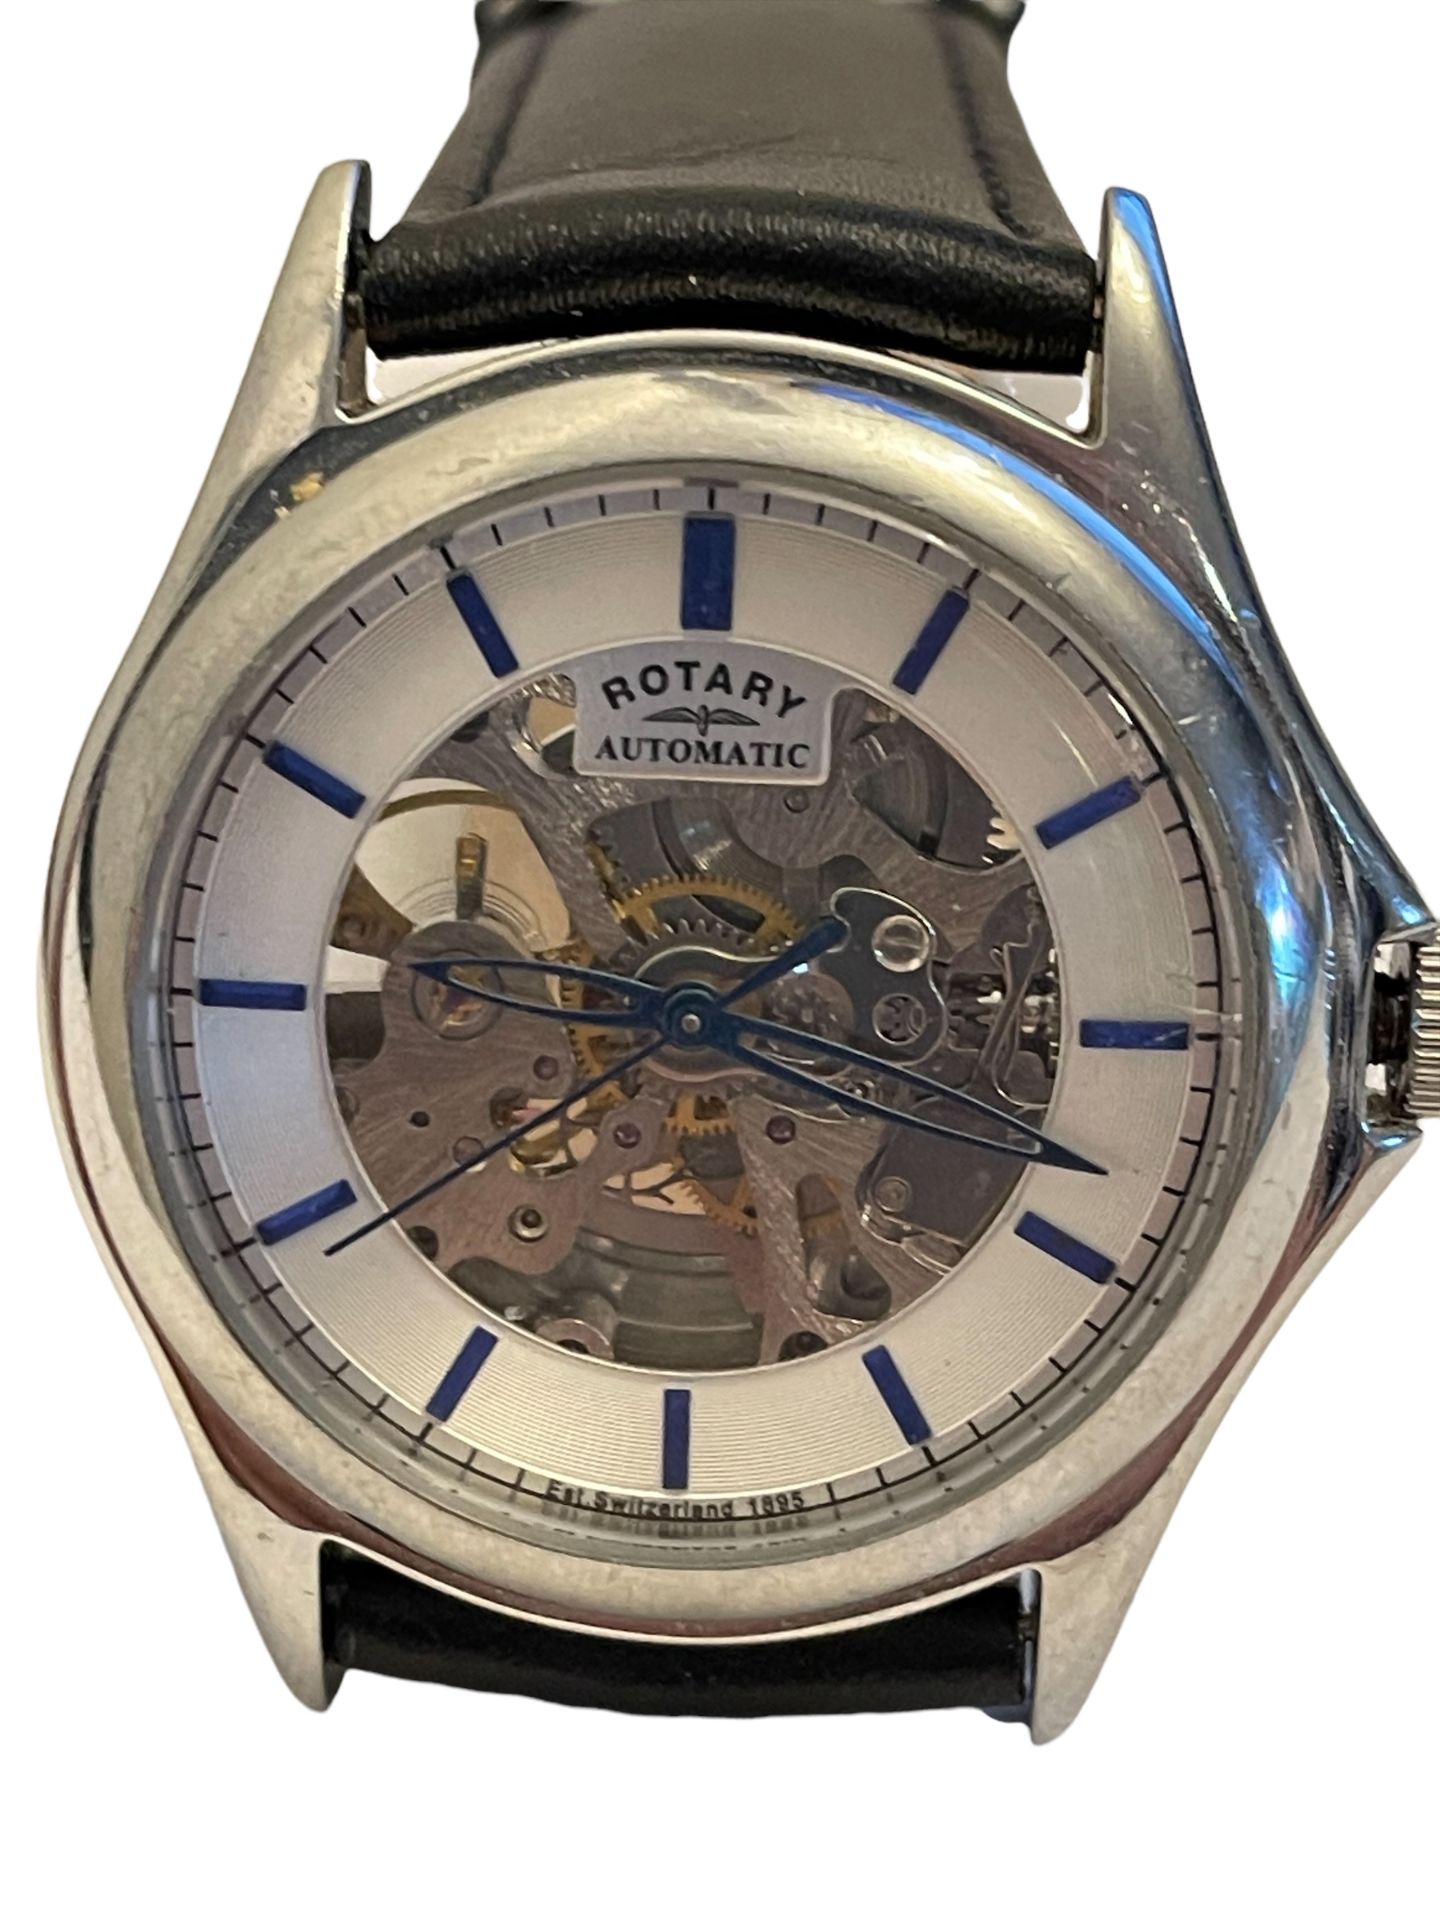 Rotary Skeleton Automatic Mens Watch - Ex Demo or Return Stock from our Private Jet Charter - Image 6 of 6